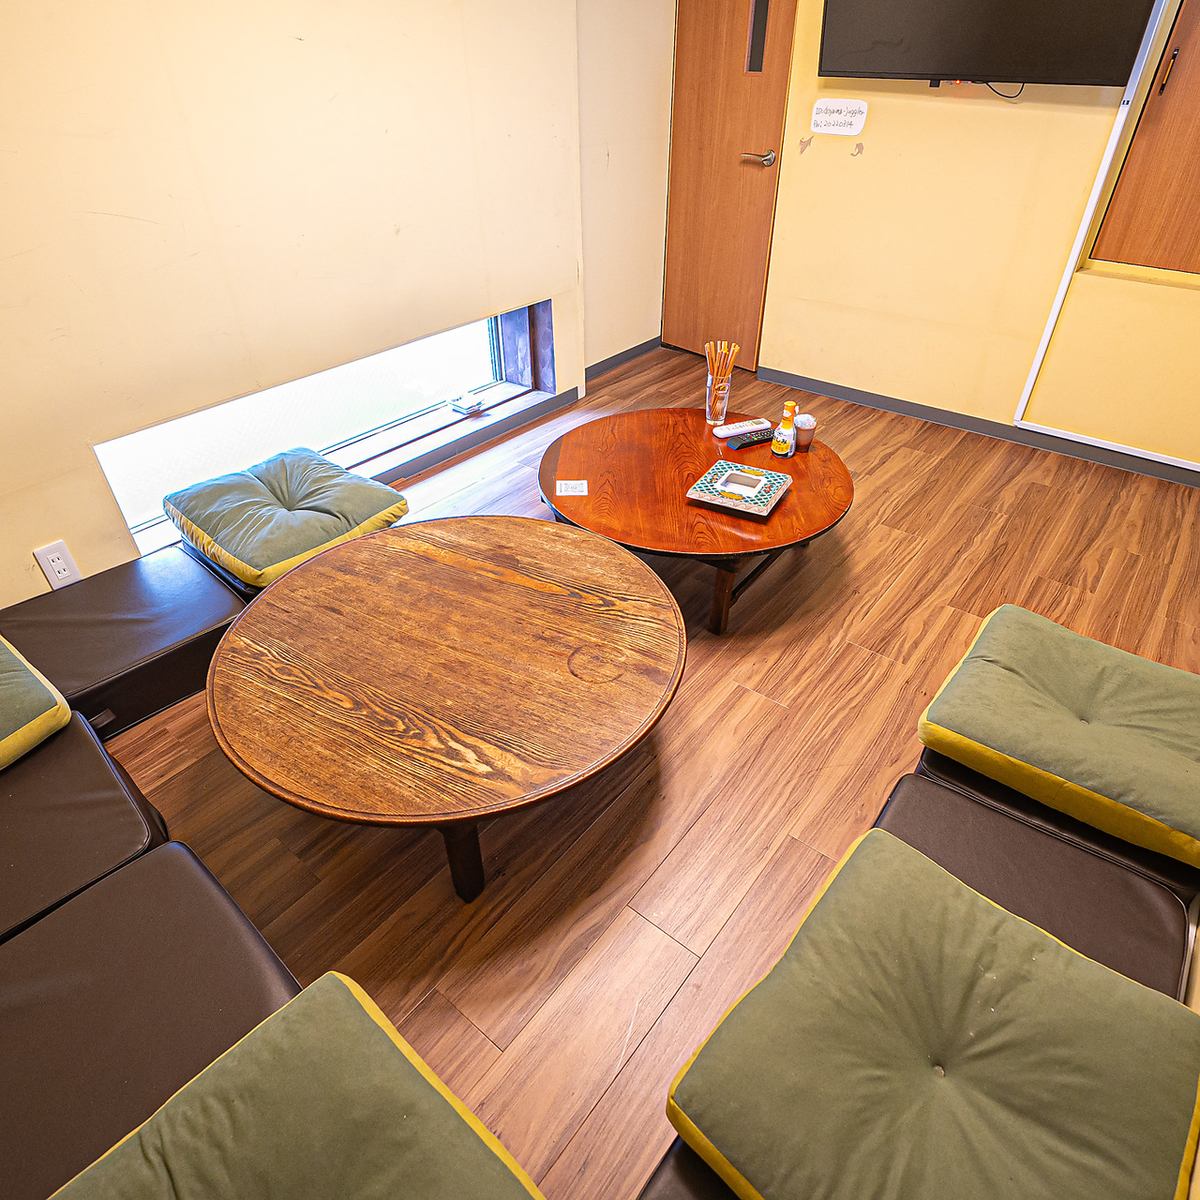 The third floor has a private room that can accommodate 6 to 10 people.